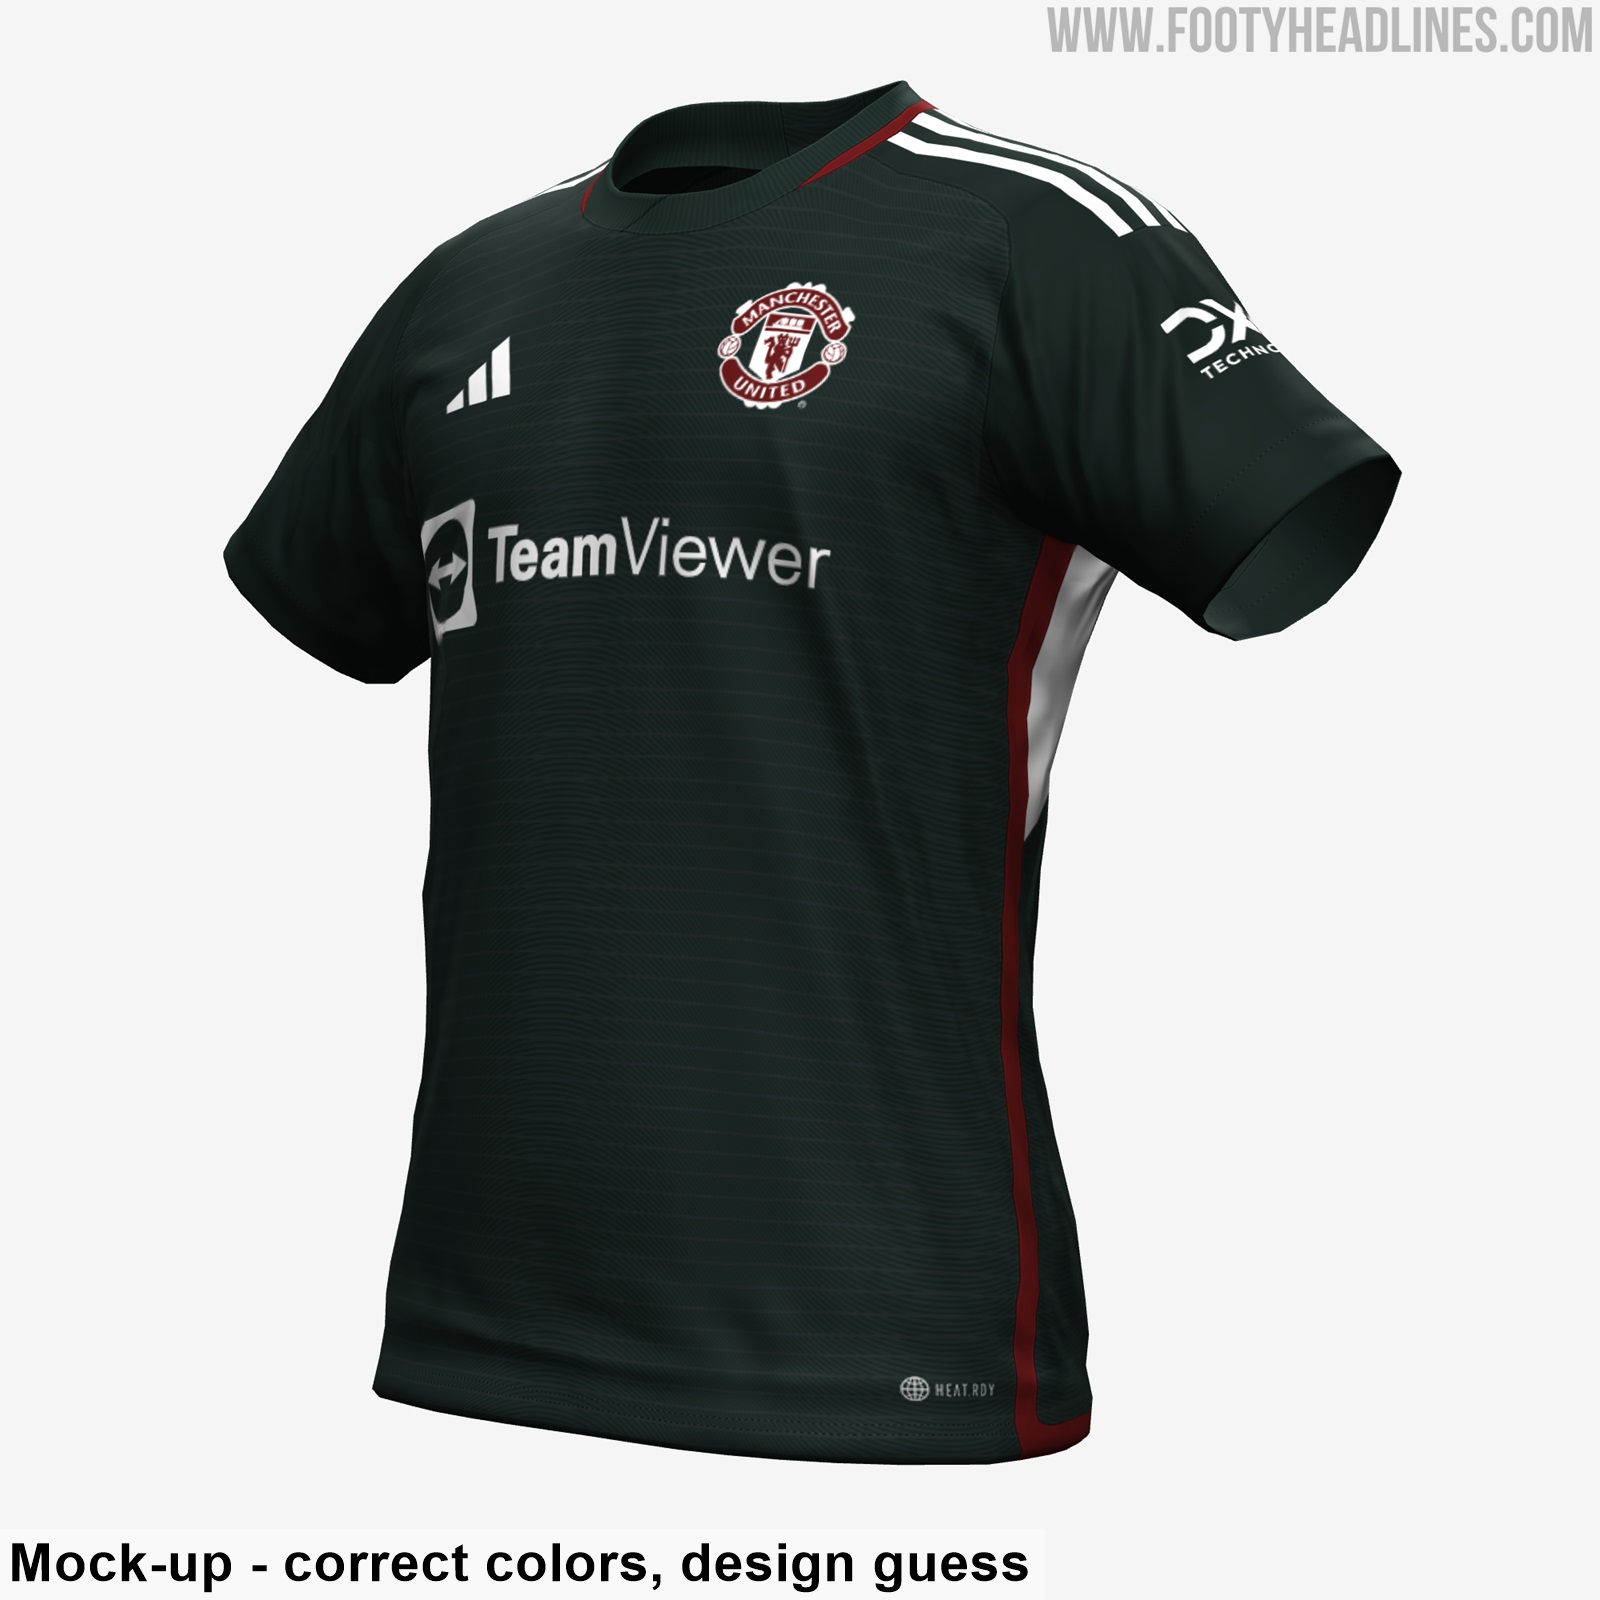 NeverUsedBefore Colors How the Manchester United 2324 Away Kit